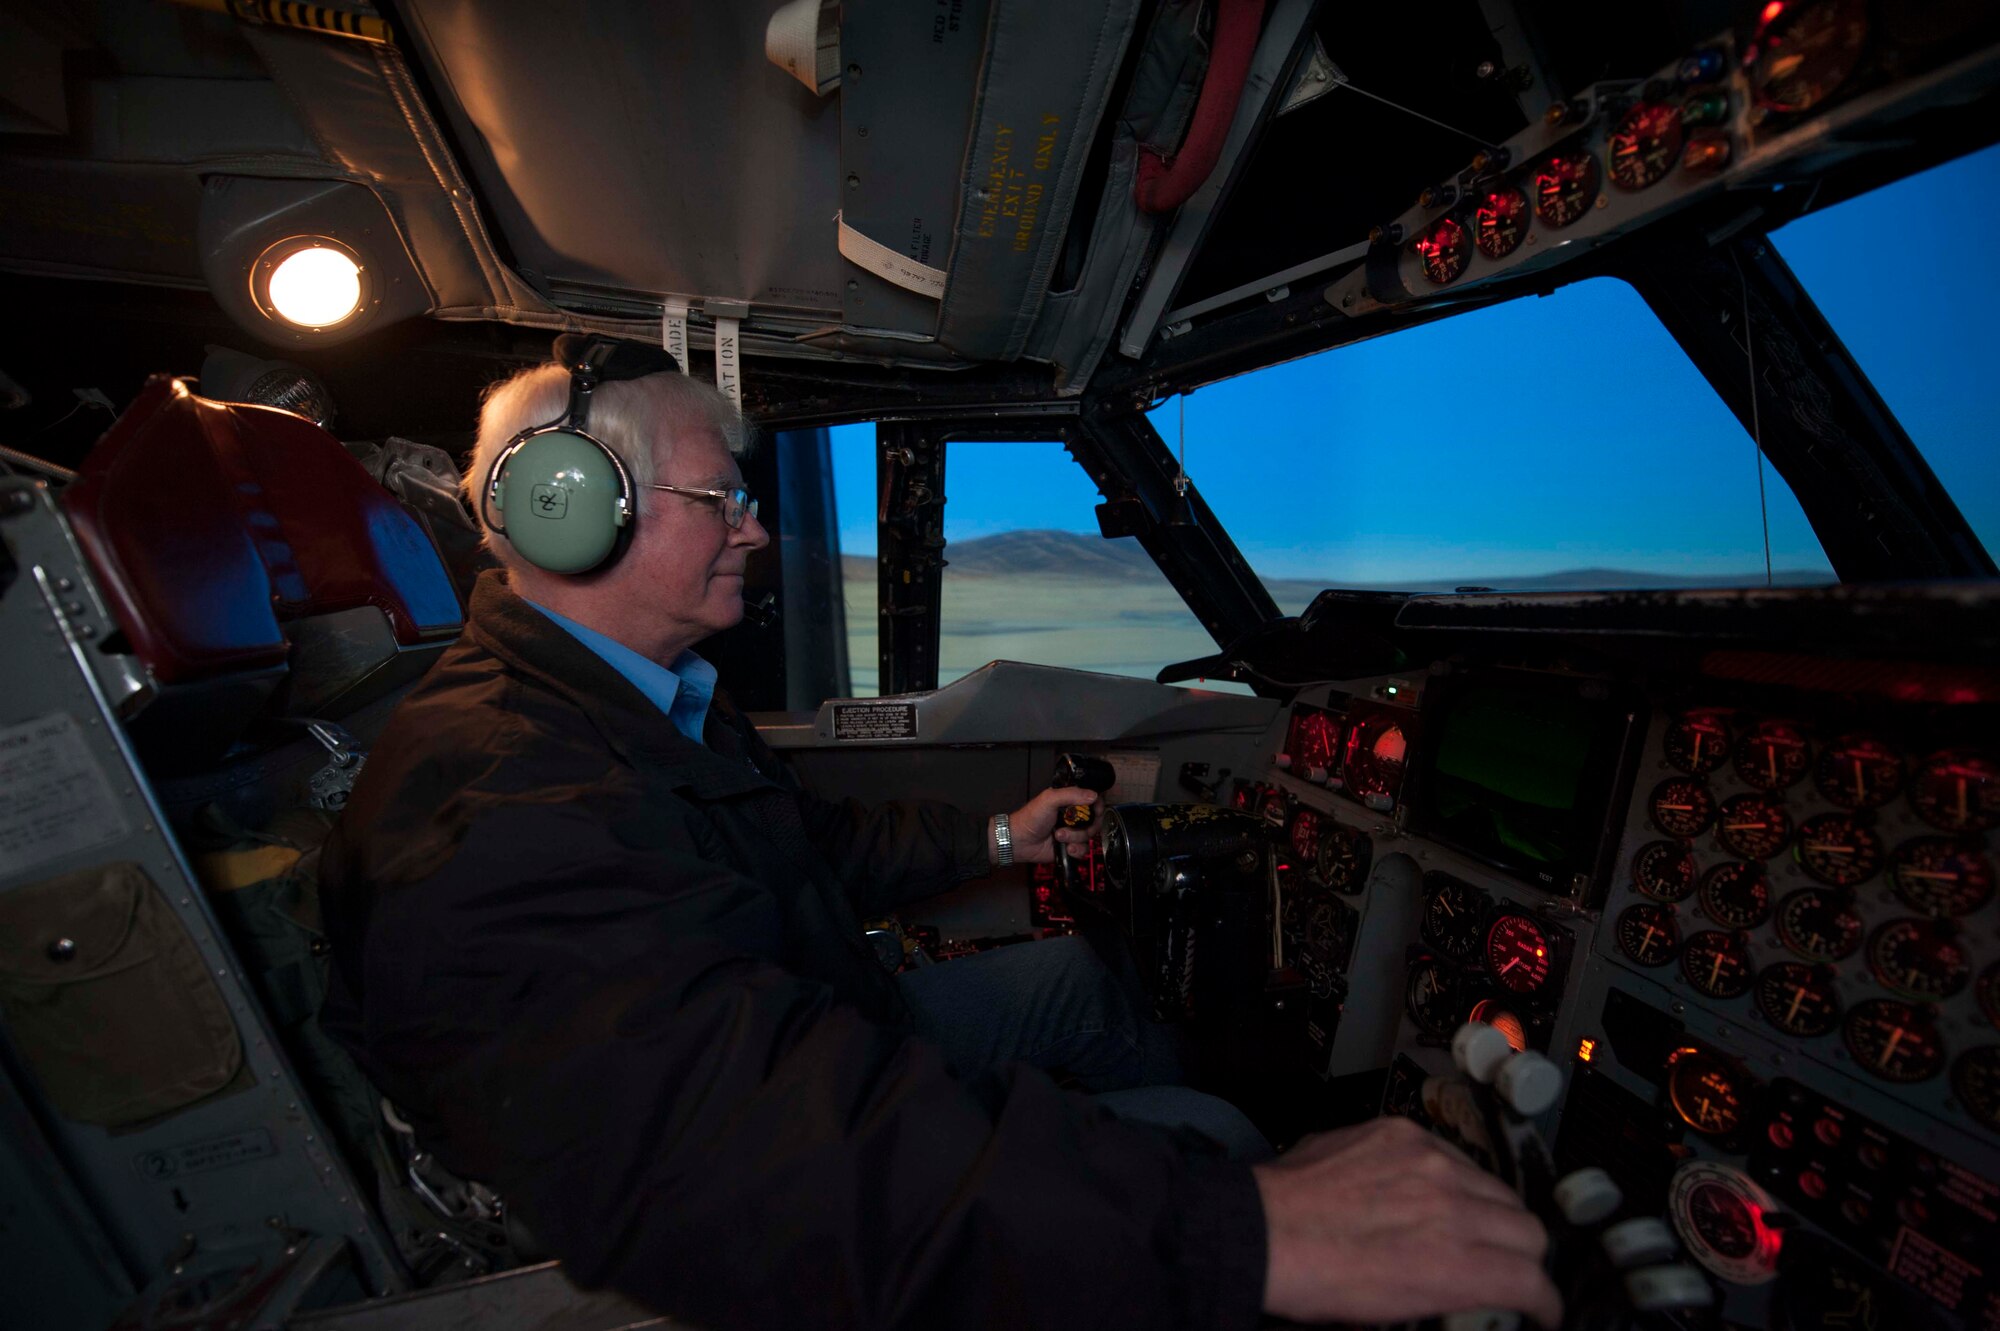 Doug Shroyer, 5th Operations Support Squadron contractor and system operator, pilots the B52-H Stratofortress weapons system trainer during a simulated flight on Minot Air Force Base, N.D., Dec. 3, 2014. New capabilities for conducting missions in the weapons system trainer are now complemented by the ability to record every action taken or word said during a scenario. (U.S. Air Force photo/Senior Airman Stephanie Morris)